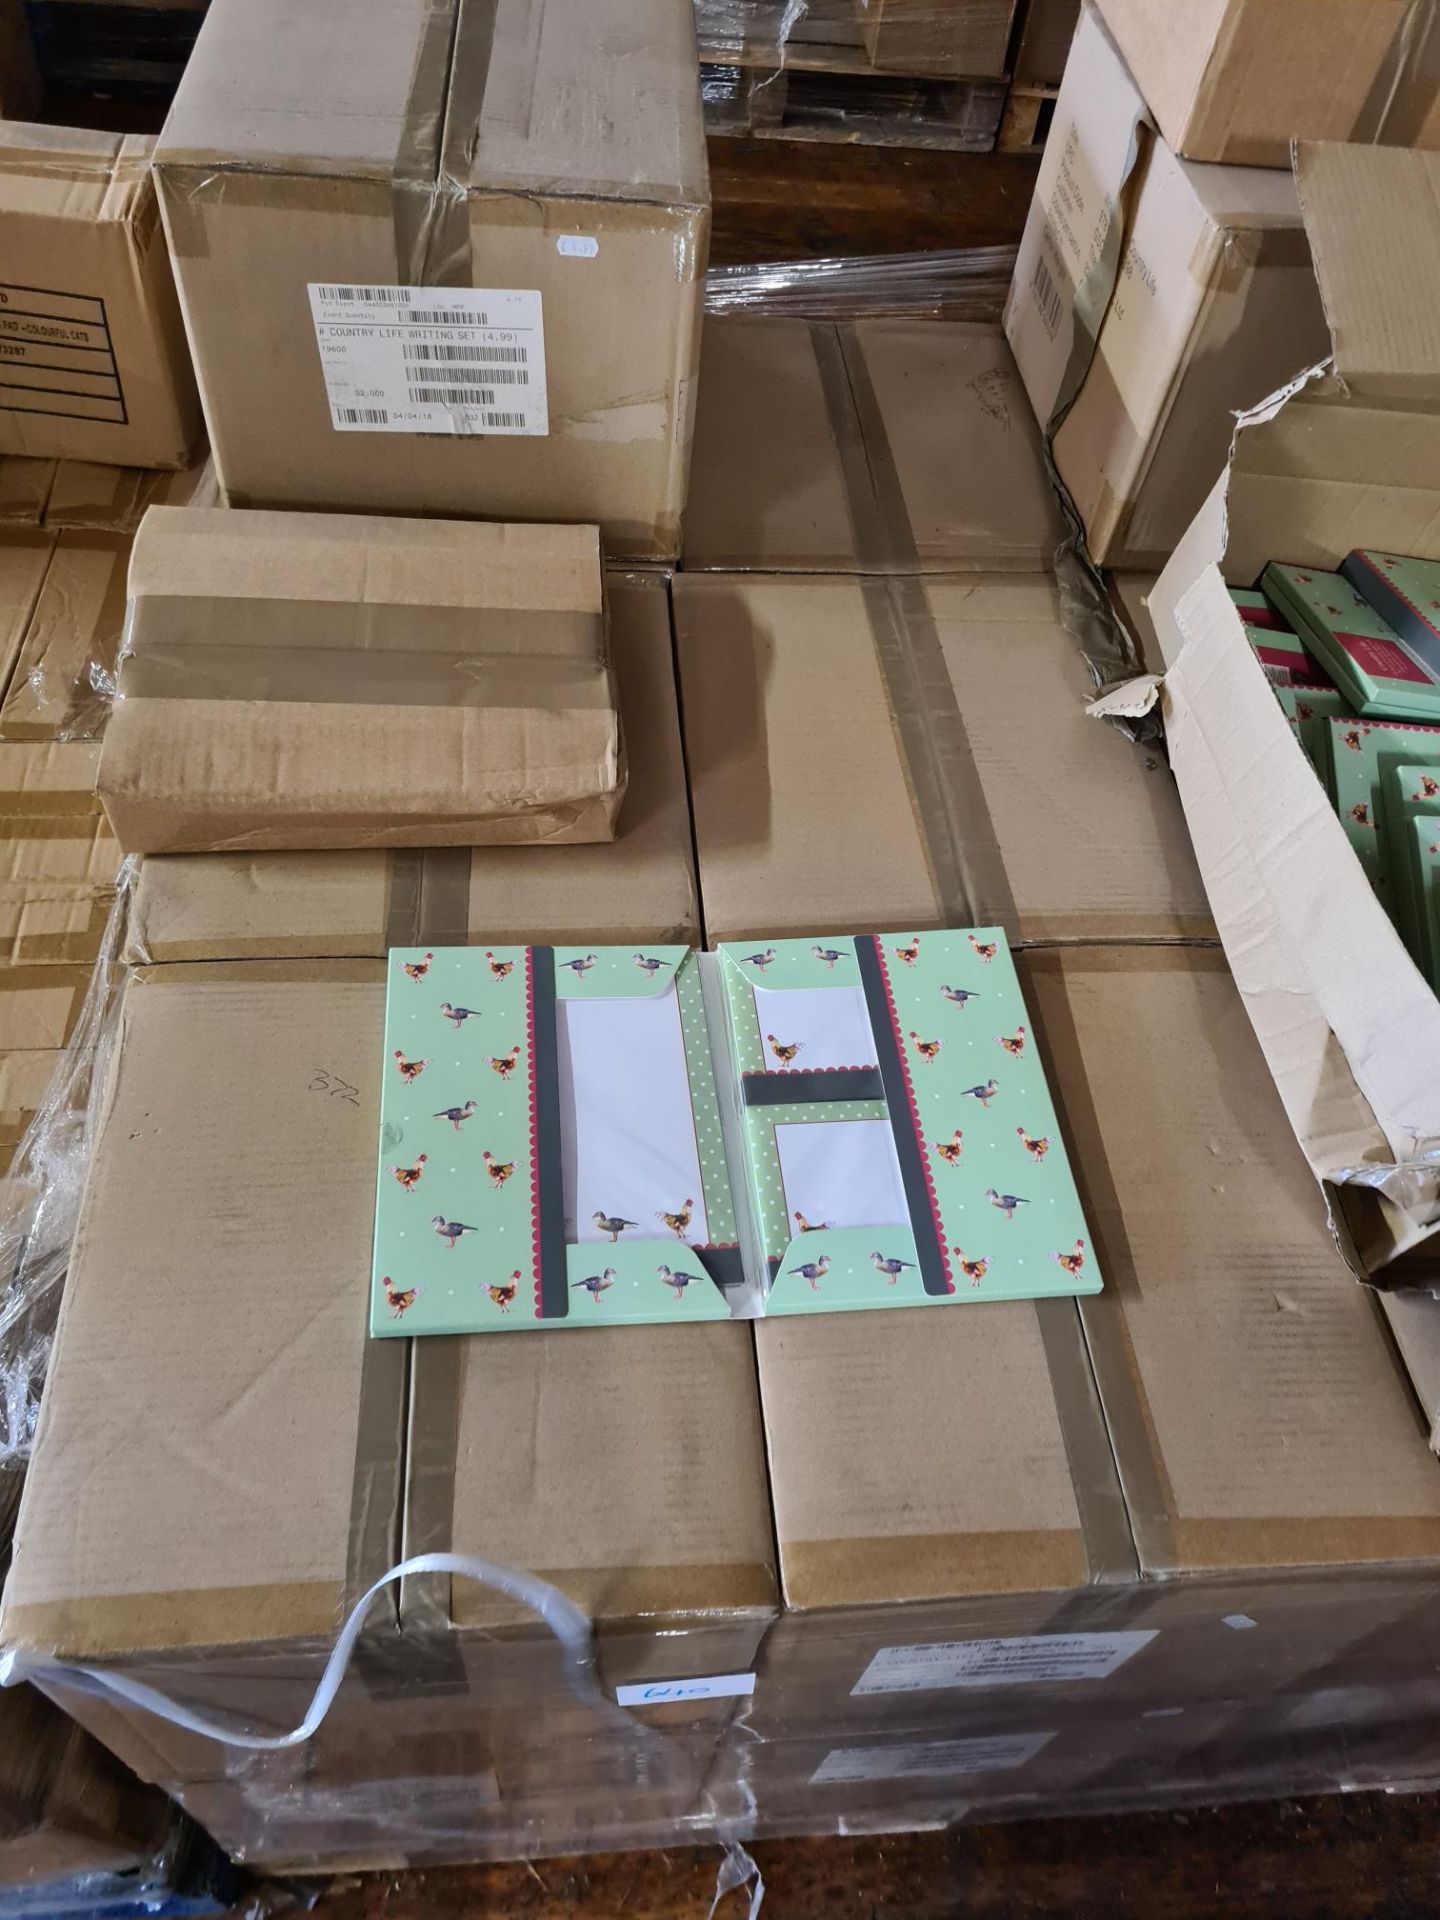 17 x Pallets of Brand New Assorted Stationary, (15000 pcs), Total RRP Approx. £70,000 - Image 12 of 26